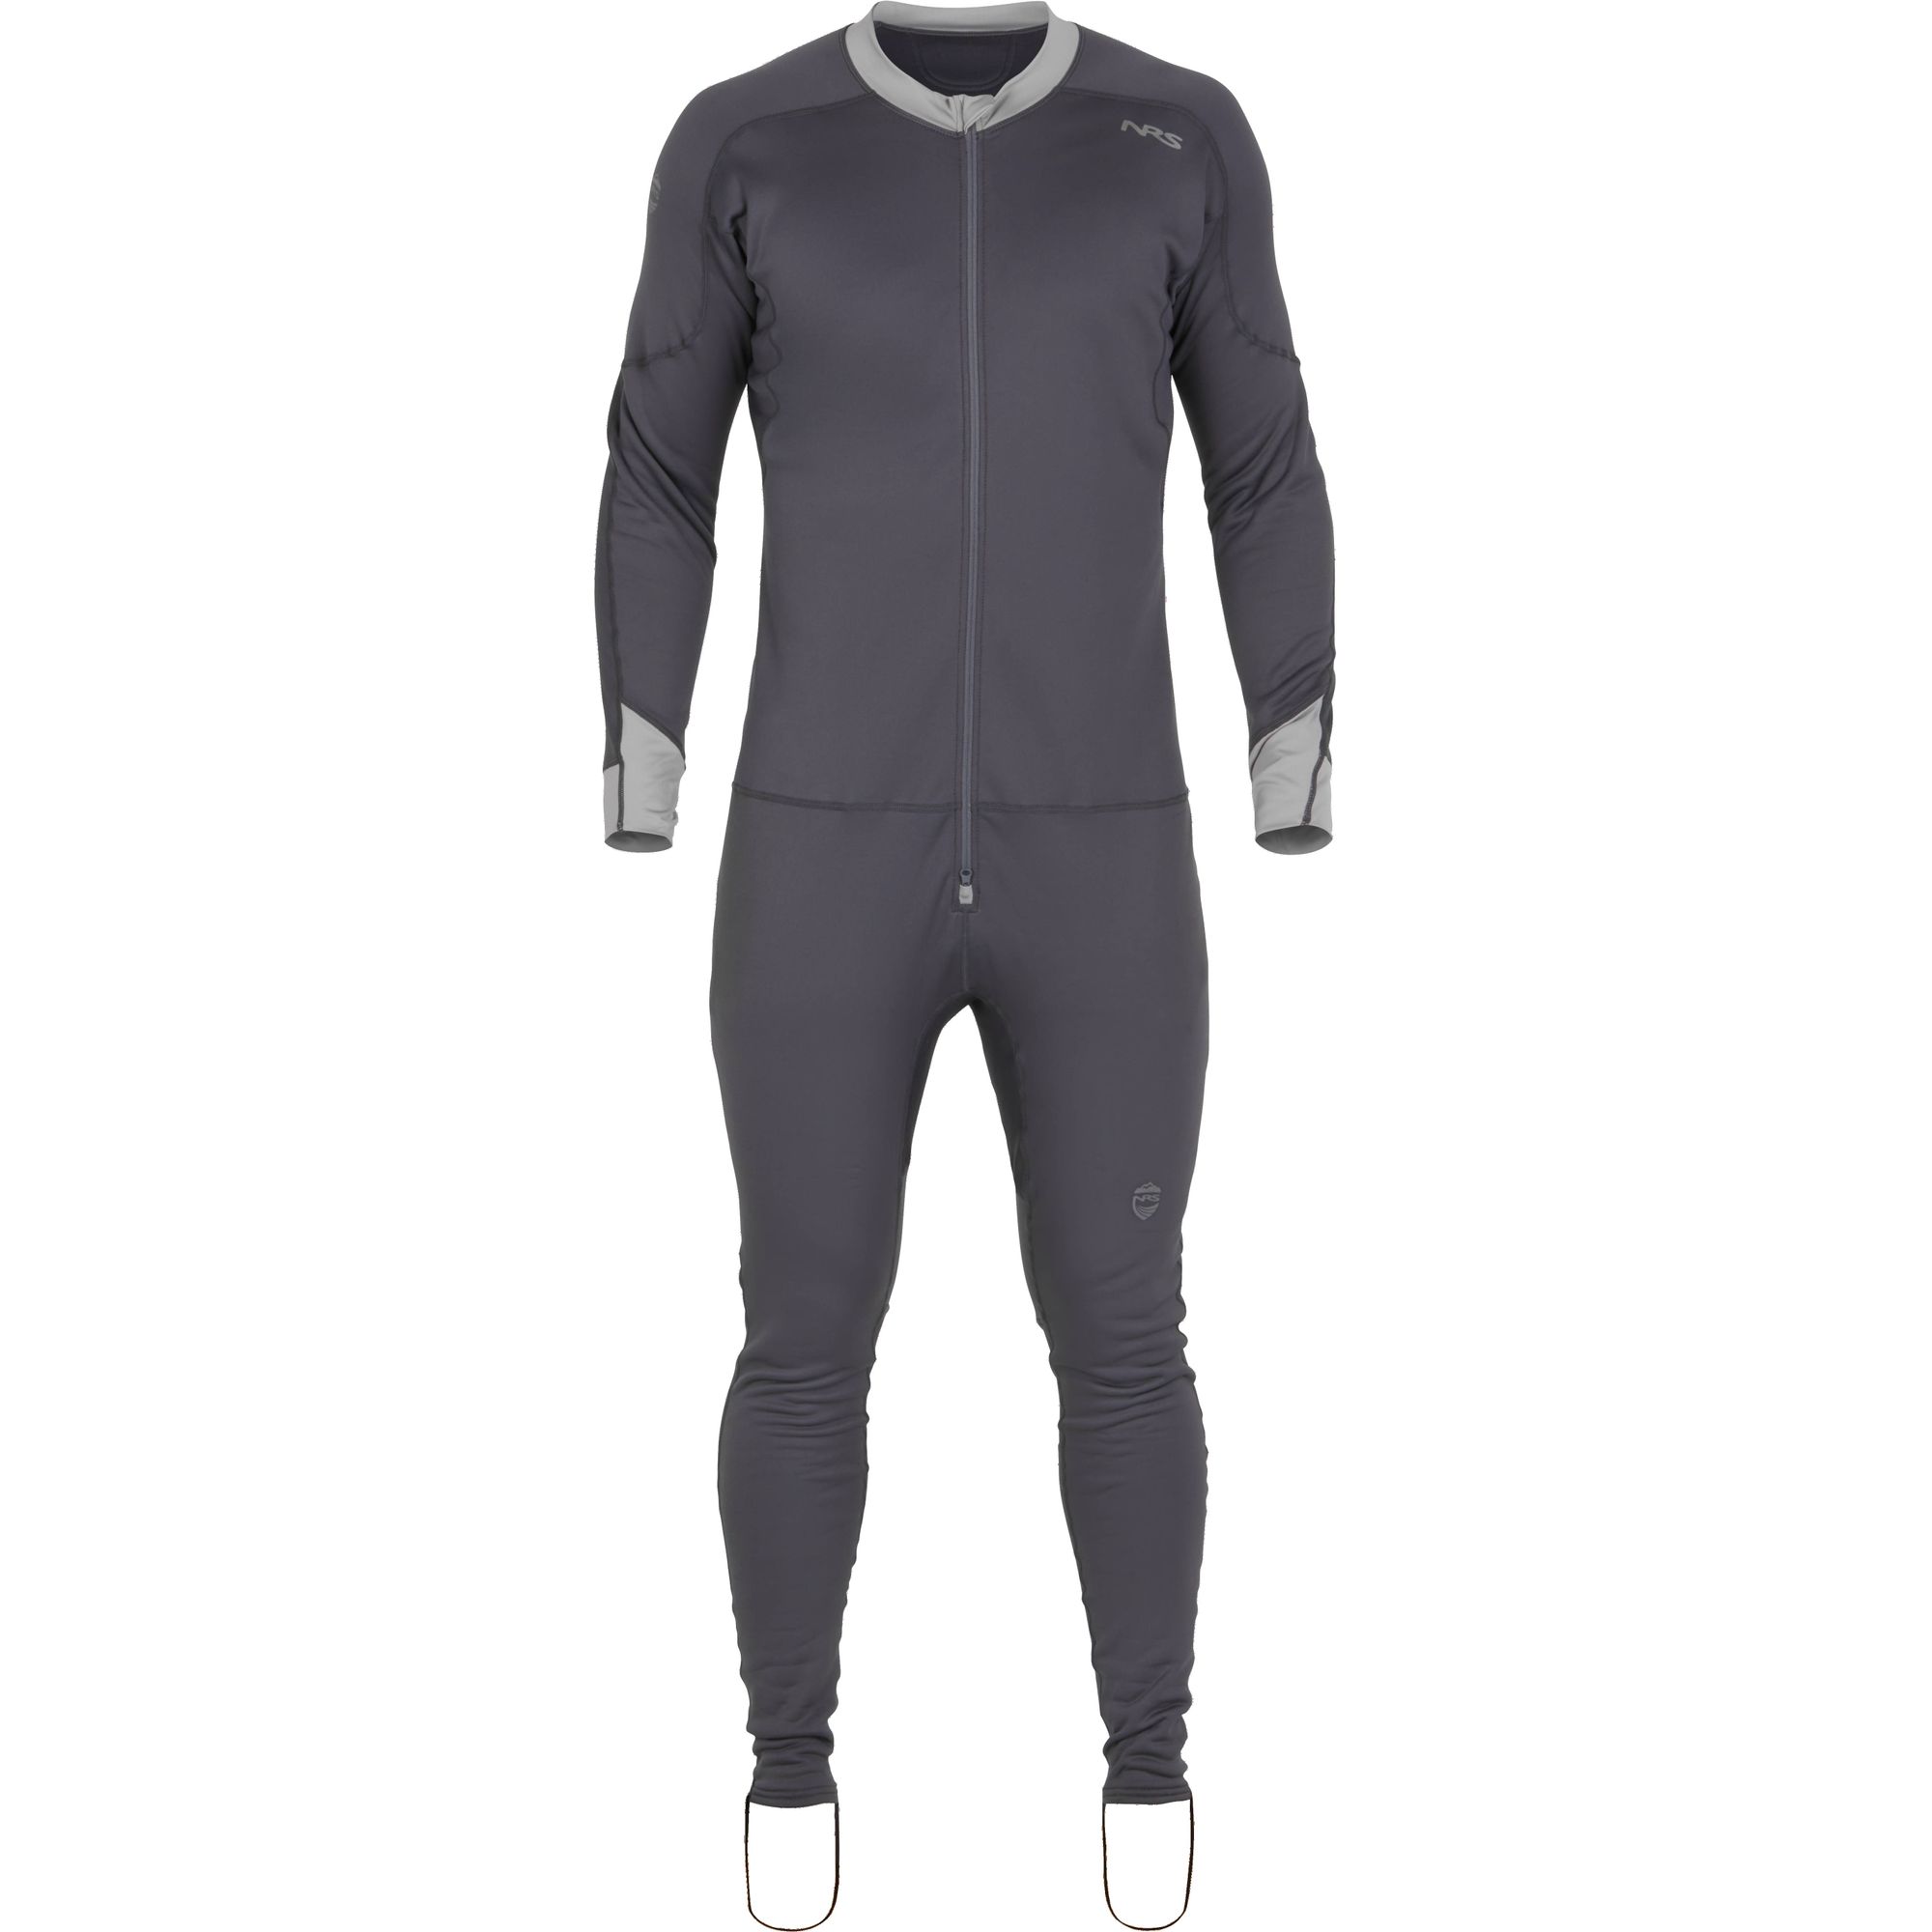 NRS Men's Expedition Weight Union Suit Fleece Anzug